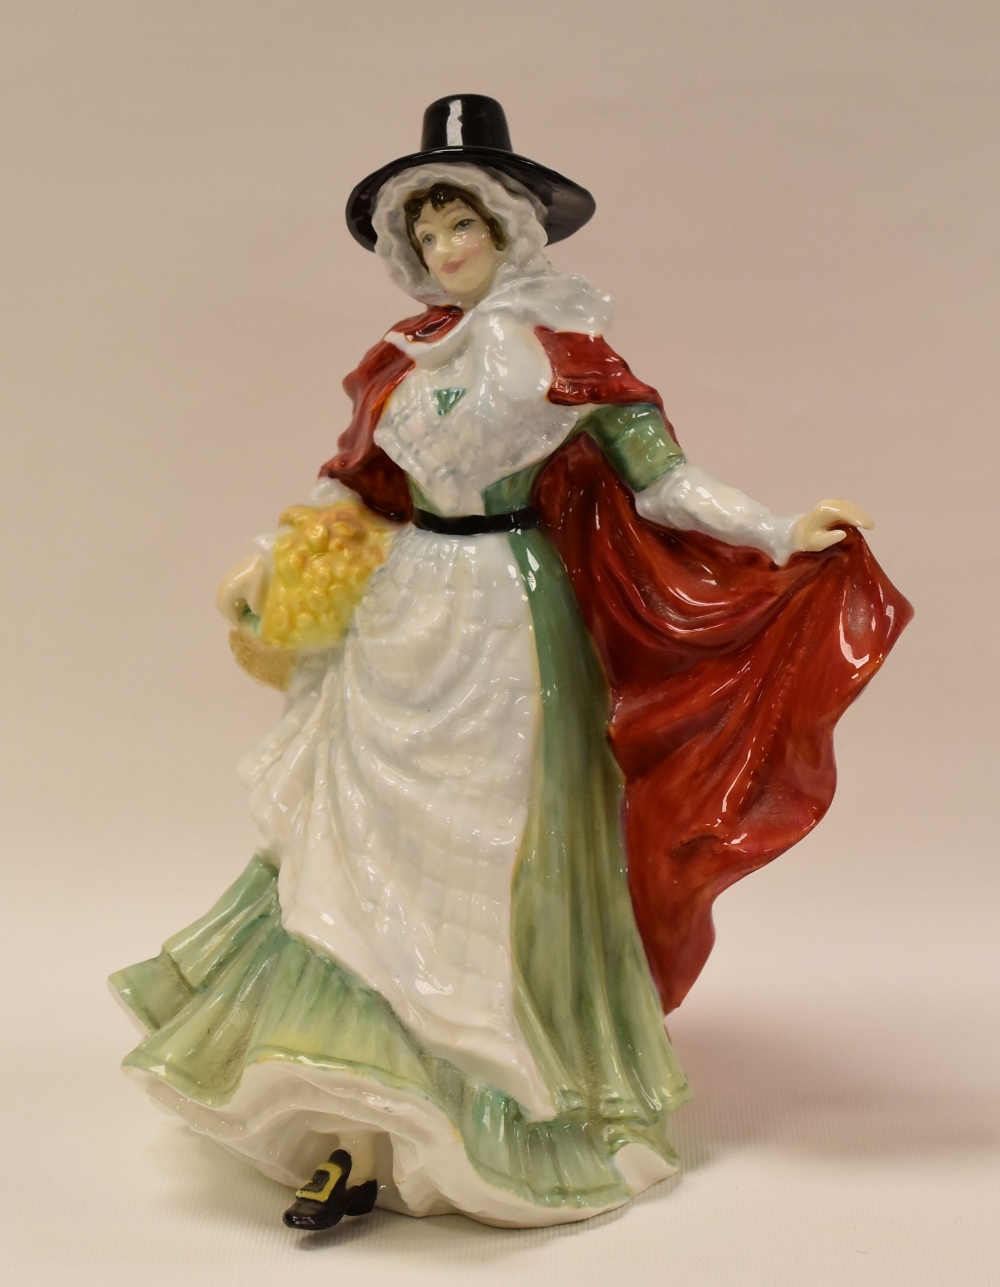 ROYAL DOULTON FIGURE 'LADIES OF THE BRITISH ISLES - WALES', HN3630 dated 1994, 19cms high